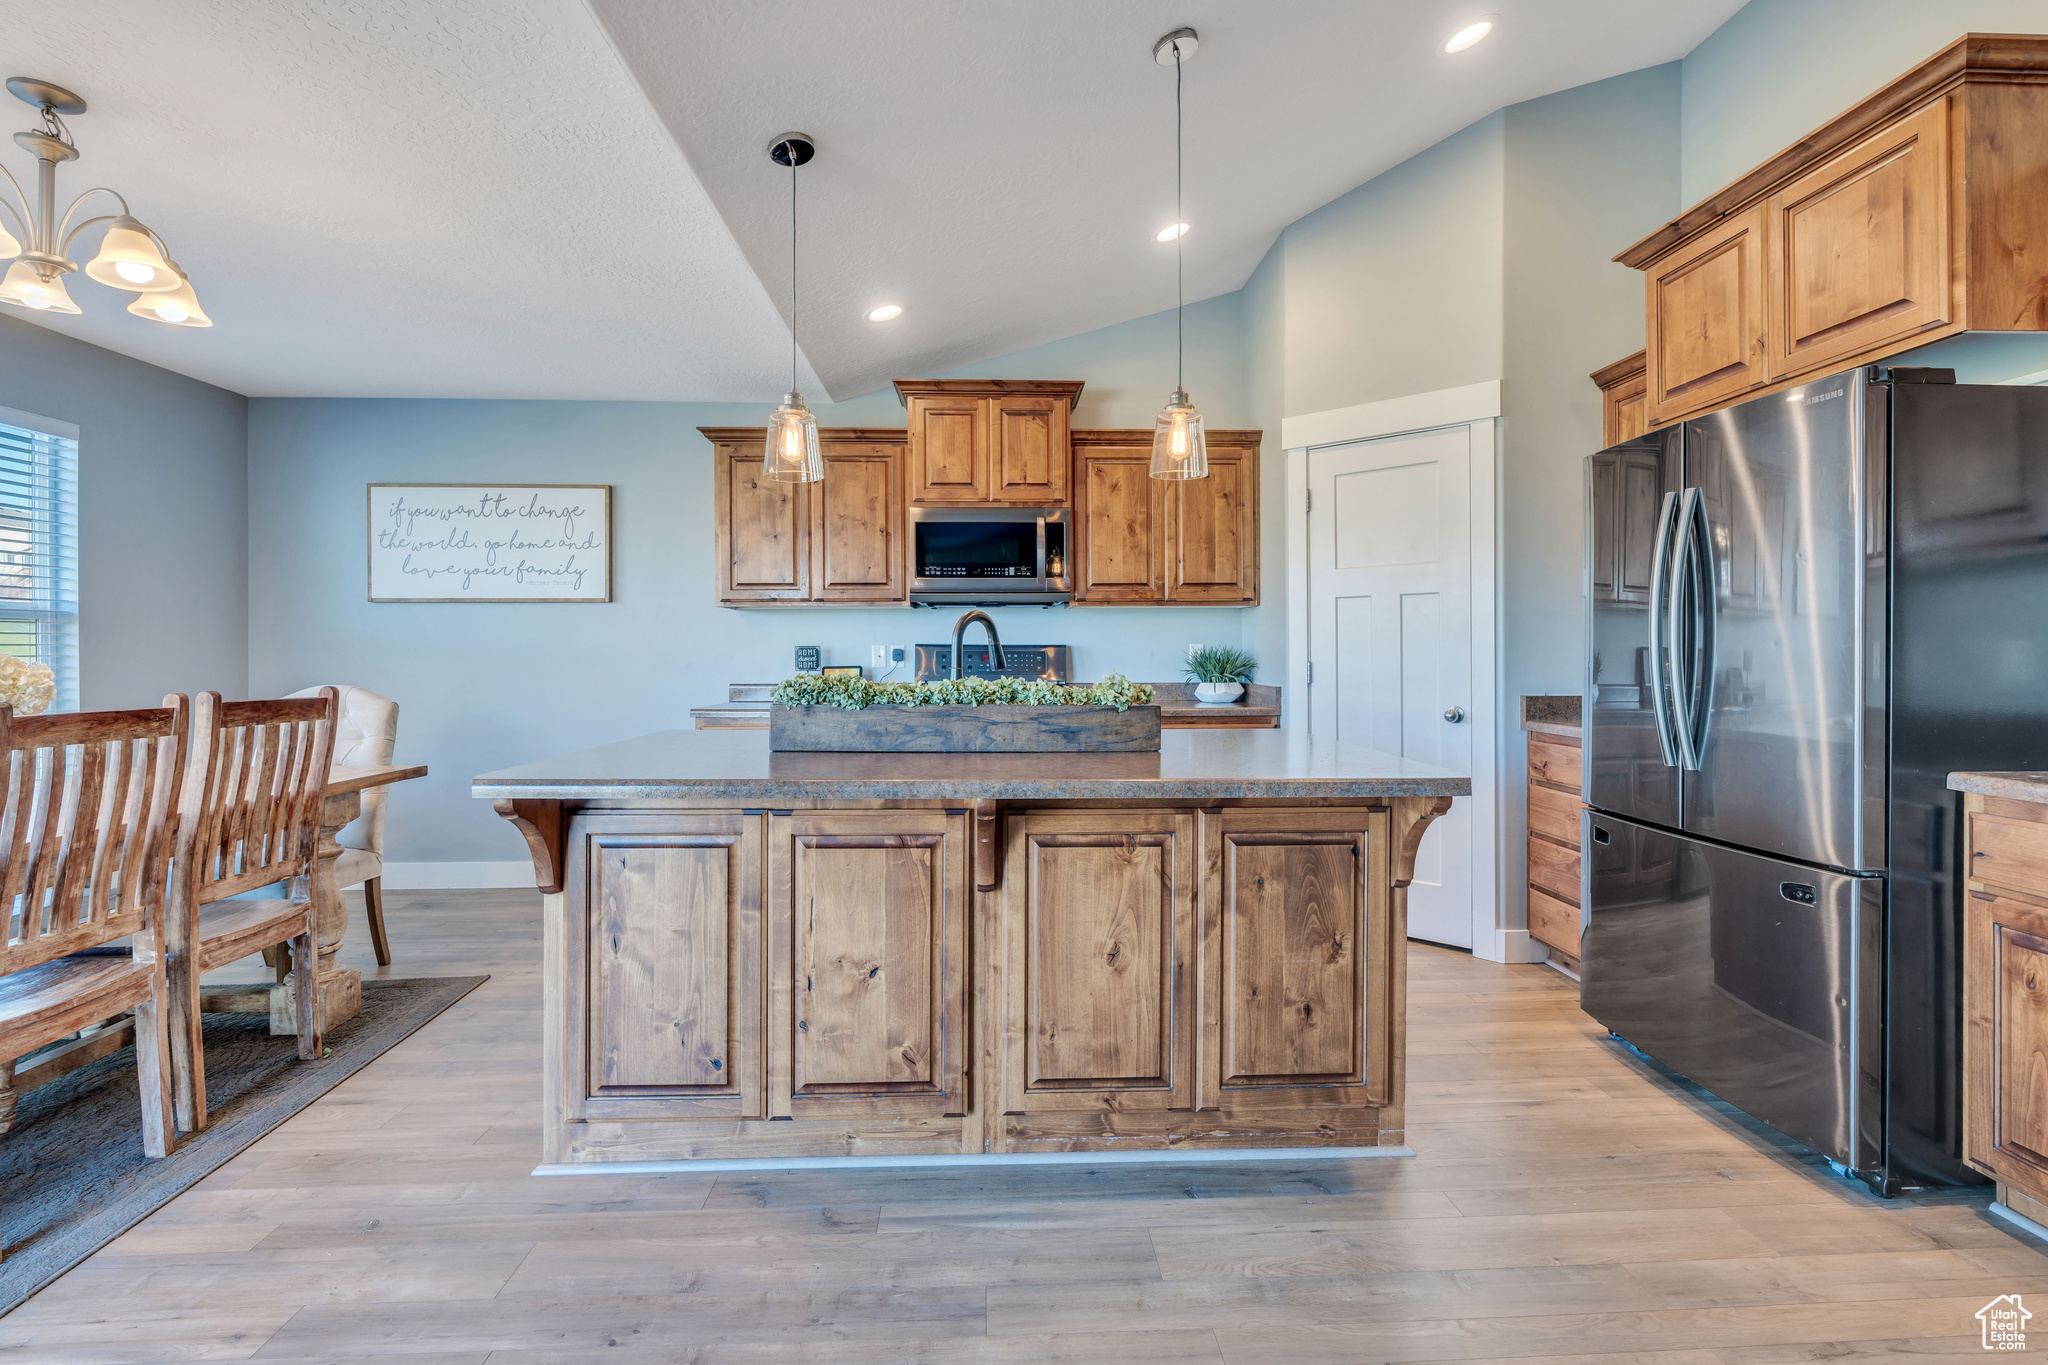 Kitchen with appliances with stainless steel finishes, a breakfast bar, light hardwood / wood-style floors, decorative light fixtures, and a kitchen island with sink